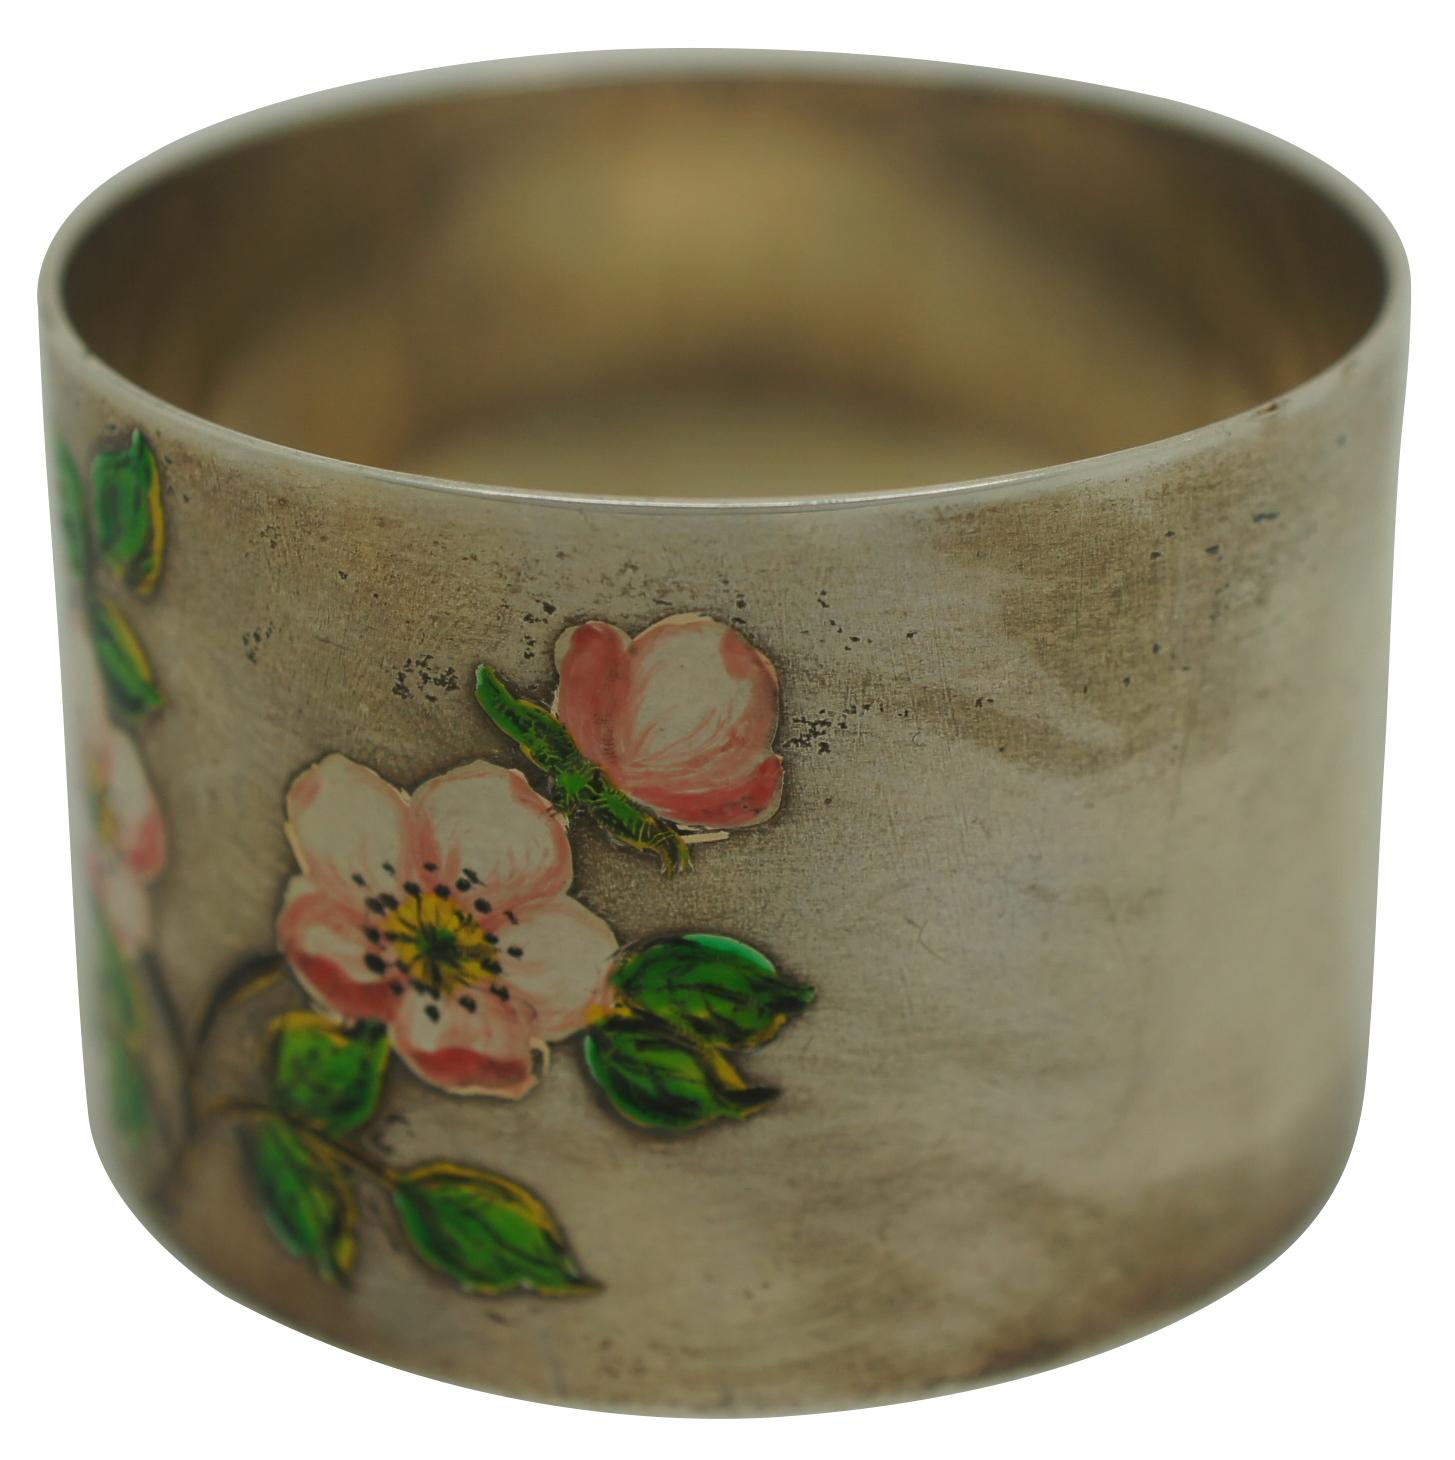 Vintage British sterling silver napkin ring circa 1960s-1970s decorated with enamel painted cherry blossoms and leaves. Marked with the Birmingham anchor, lion and a date letter V. Maker’s mark reads RII.

Measures: 1.75” x 1.25” (diameter x